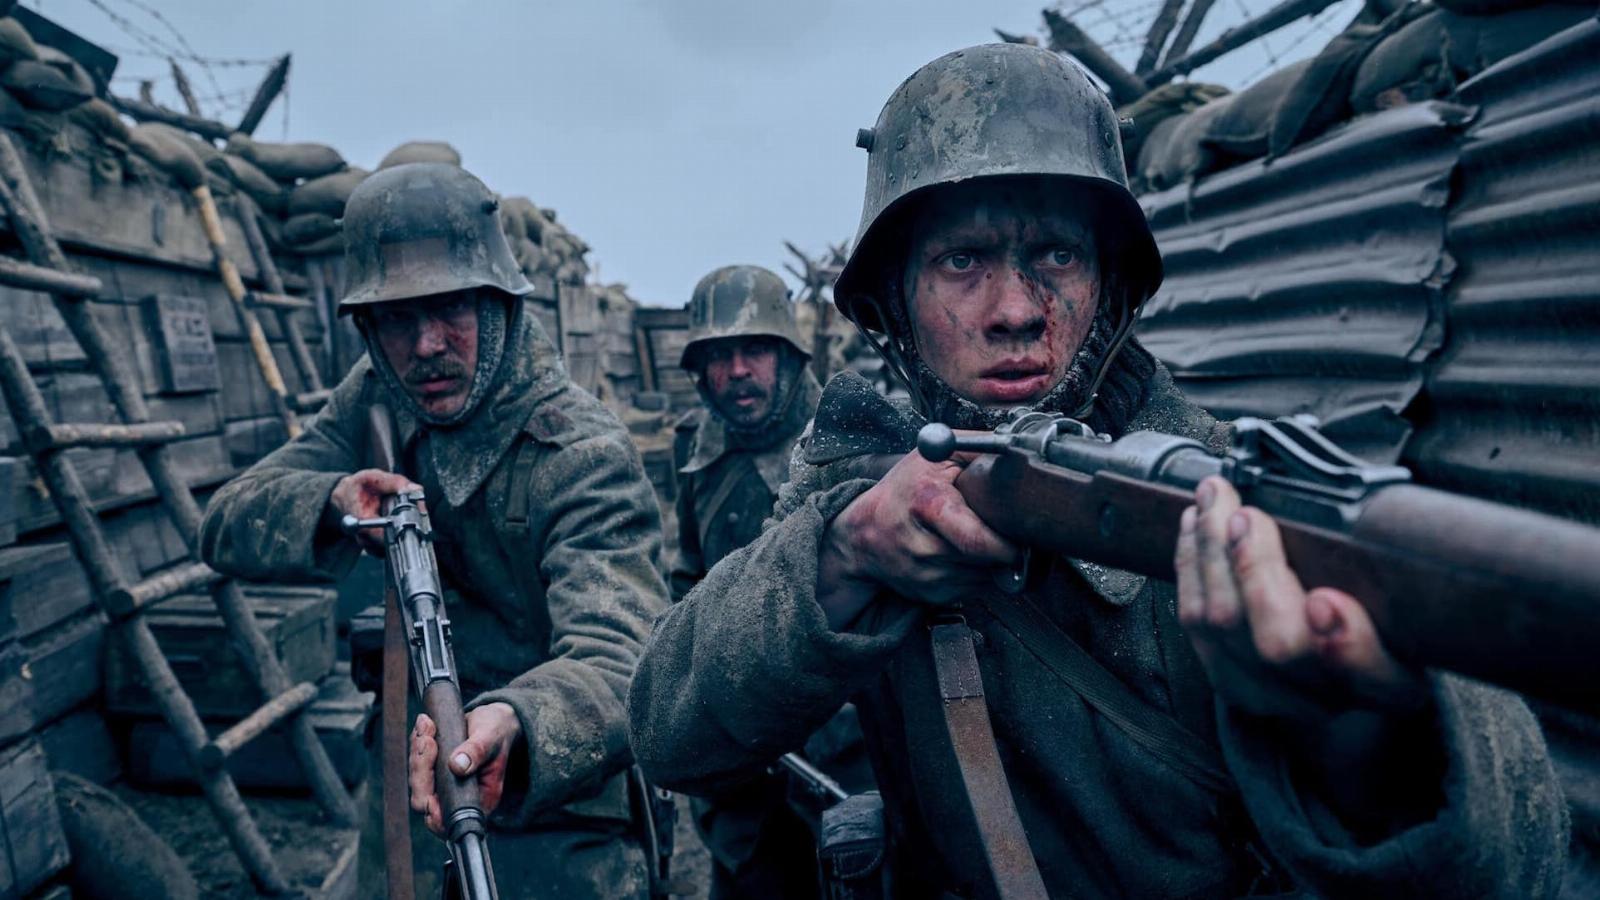 Netflix nabs six Oscar wins, including ‘All Quiet on the Western Front’